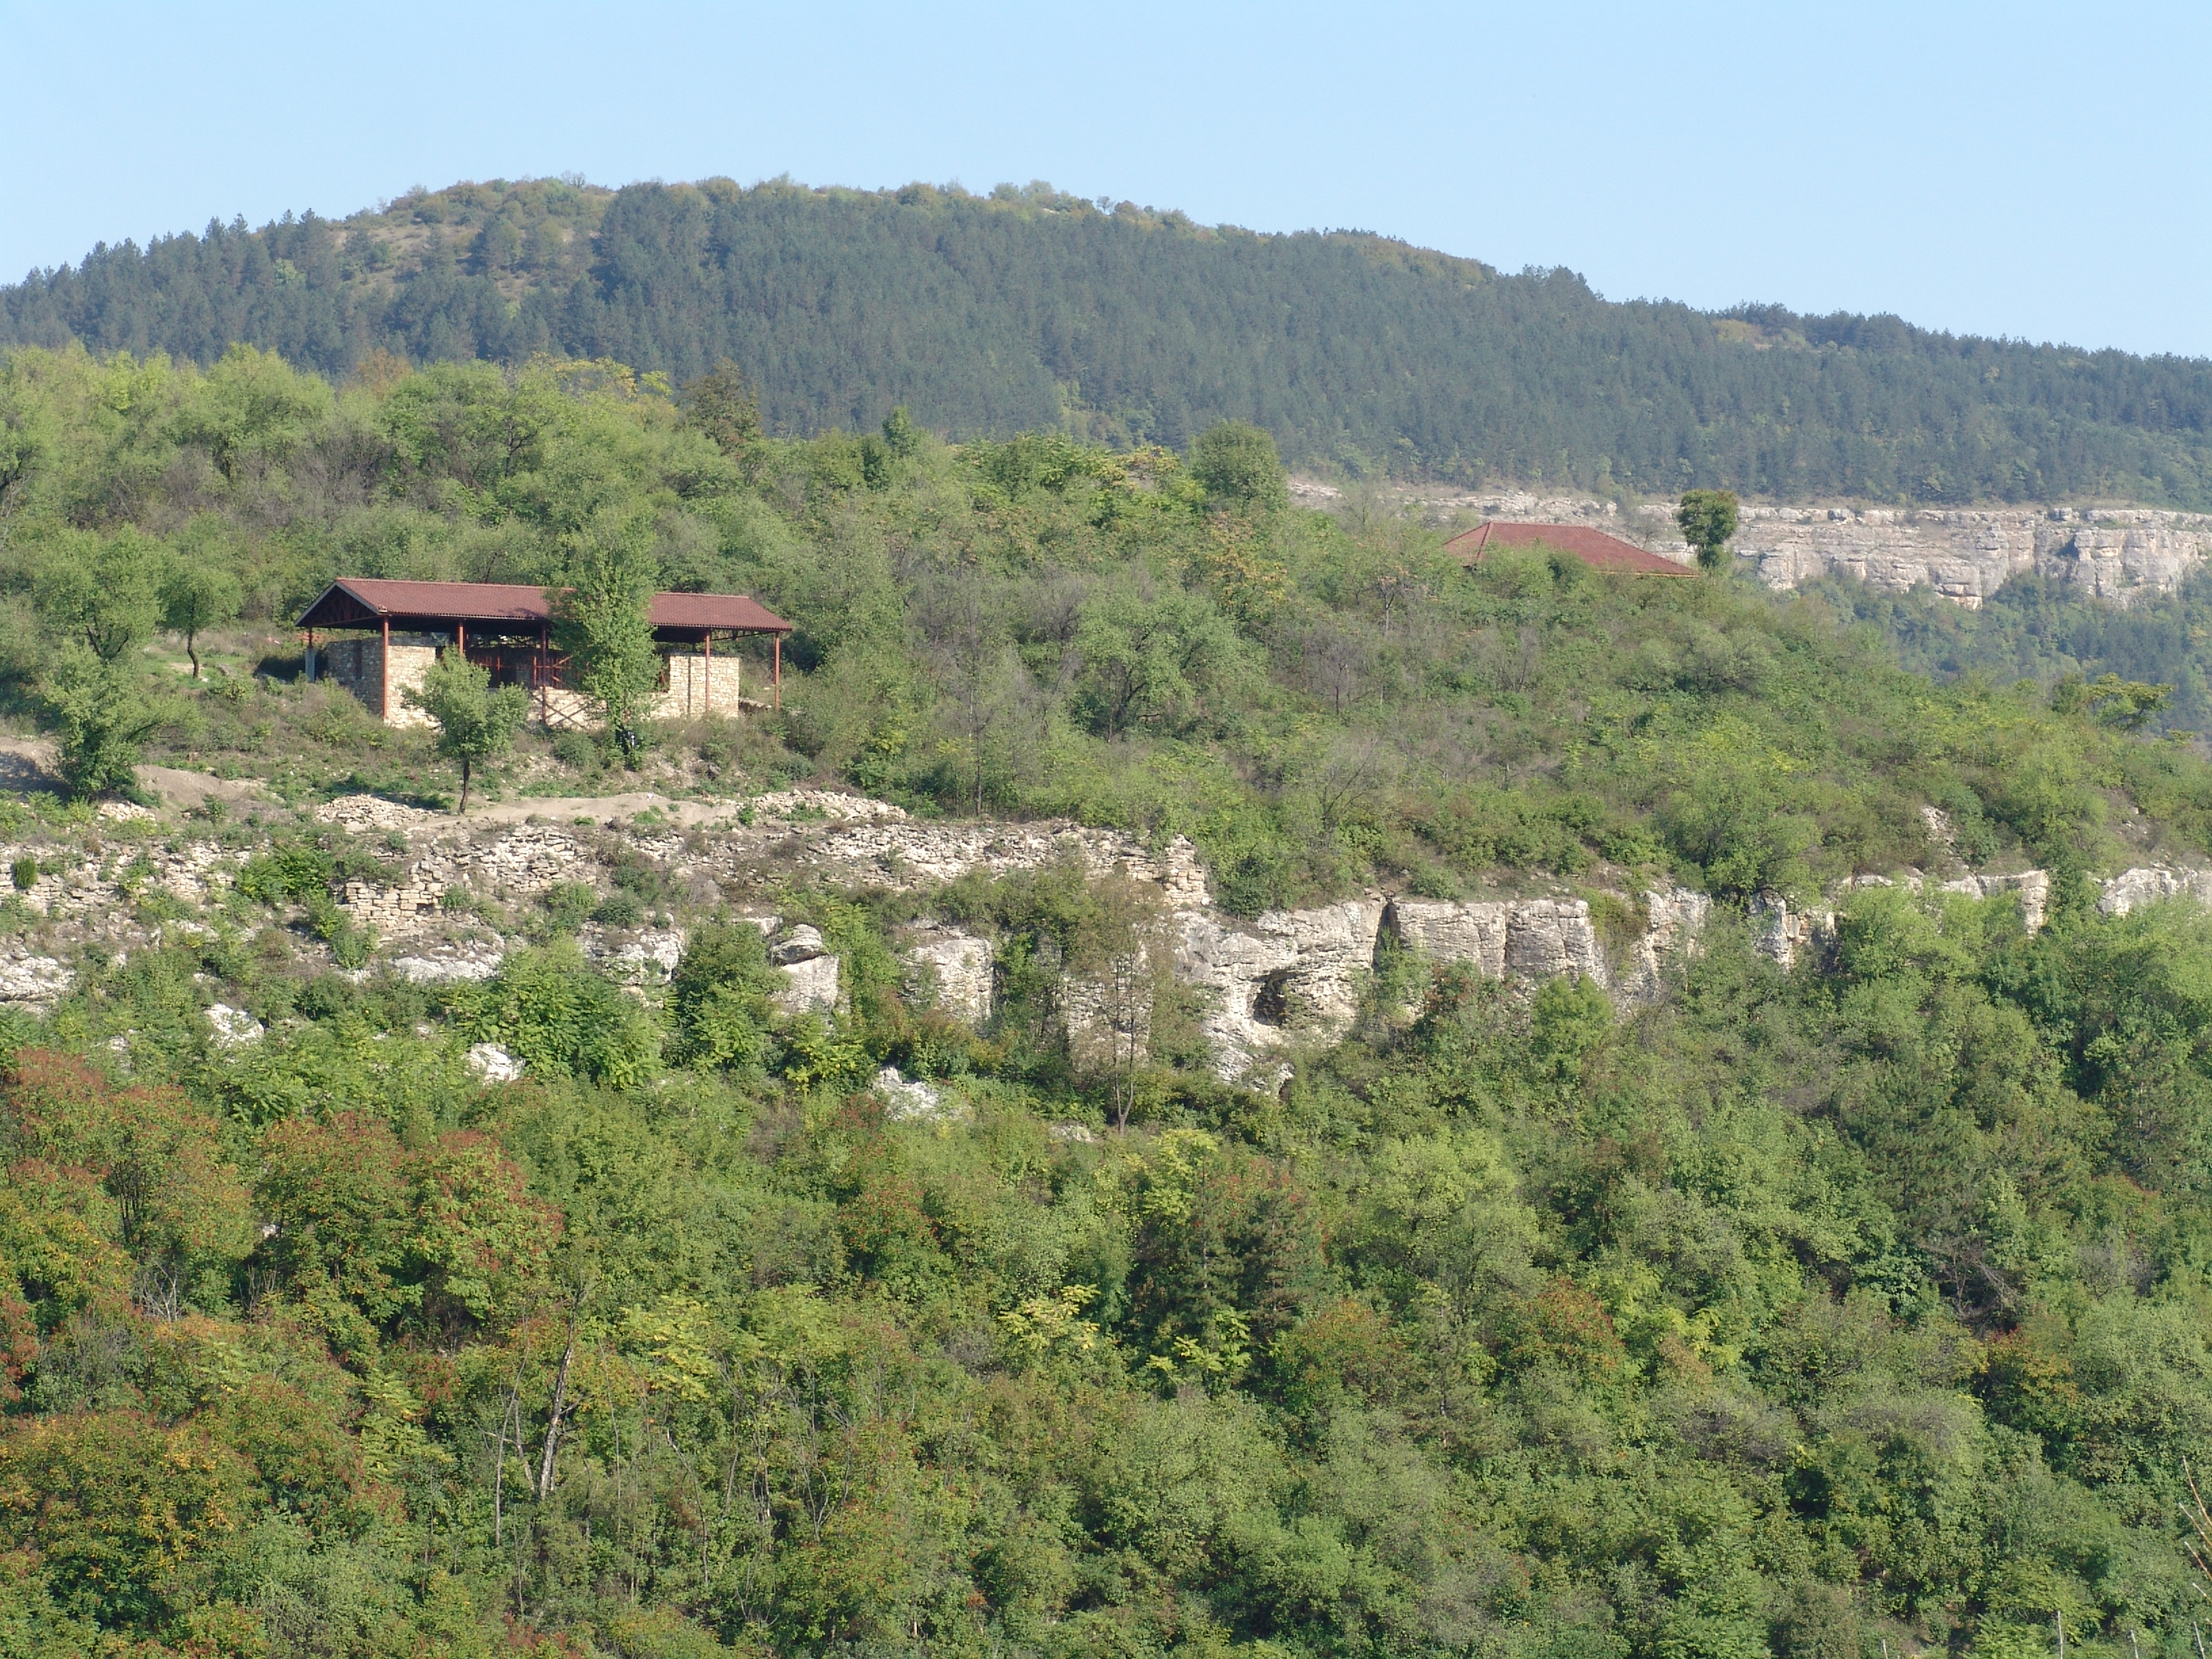 The Trapezitsa hill in the town of Veliko Tirnovo is a declared National Archaeological Reserve. The photo on the left was taken a few years ago, the photo on the right in 2014 - showing the significant reconstruction works. © Stefan Belishki